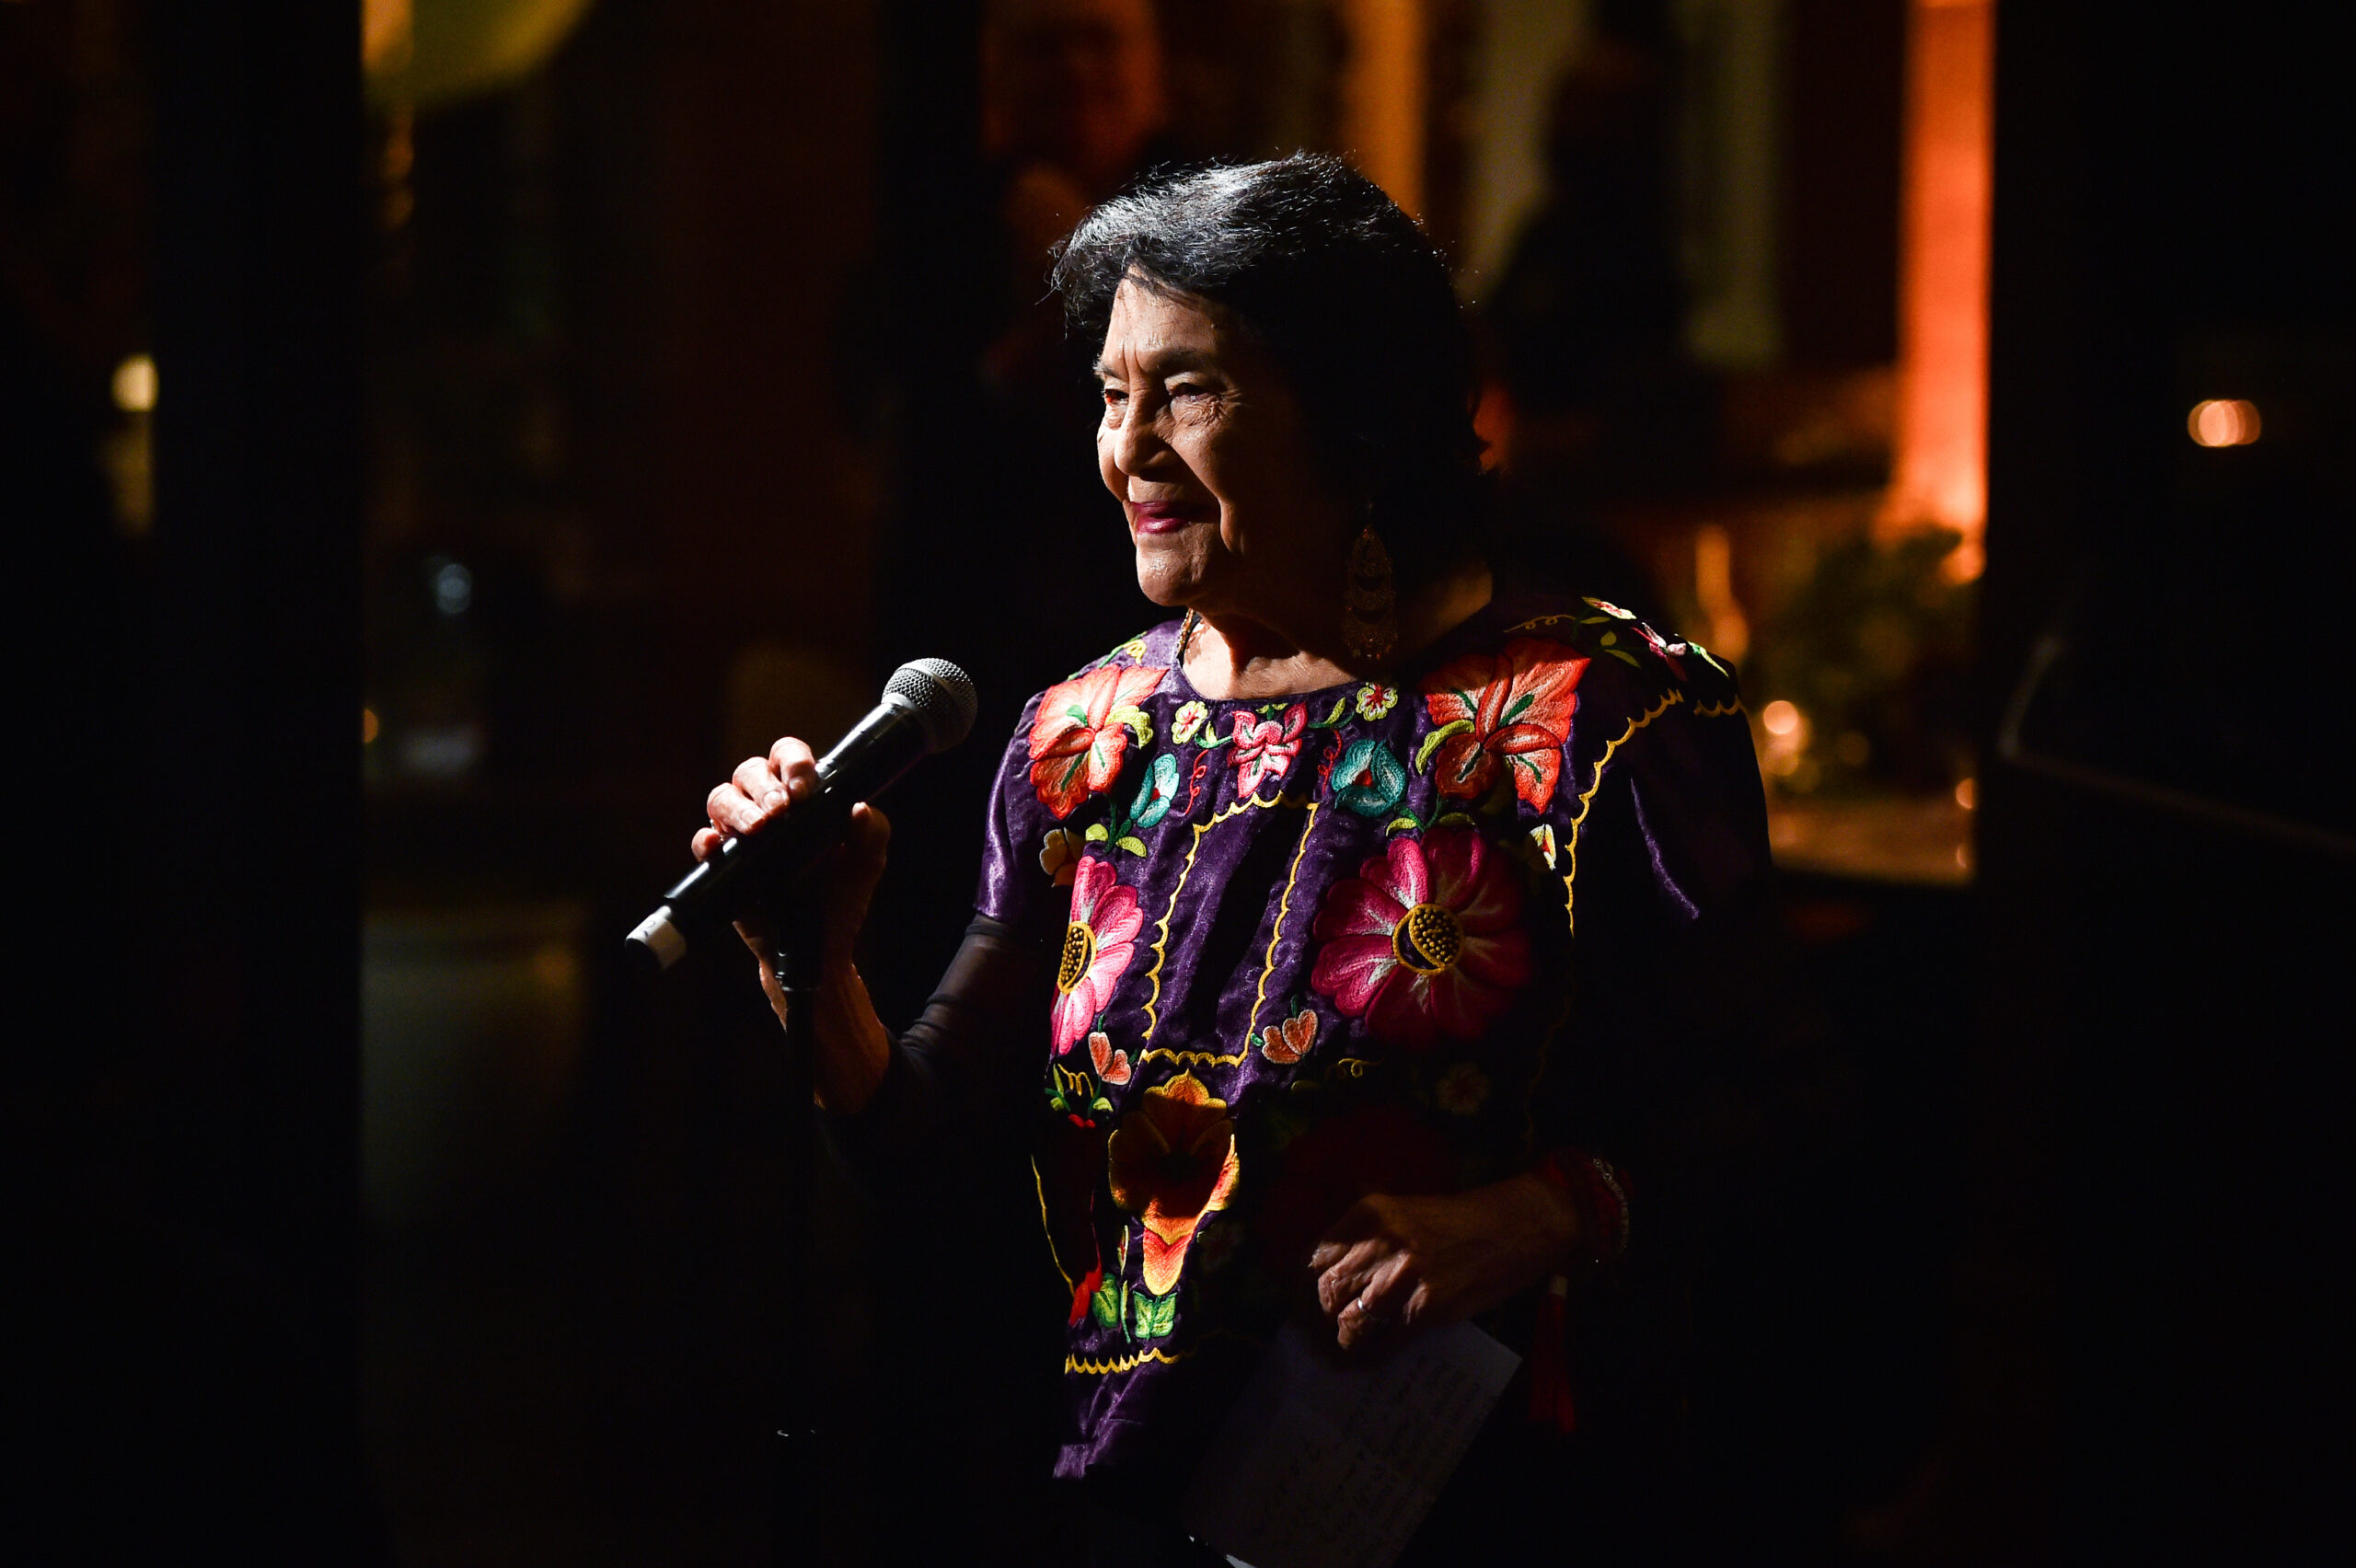 From Eva Longoria to Dolores Huerta, TIME's Latino Leaders Dinner Celebrated Some of the Latino Voices Shaping the Future 